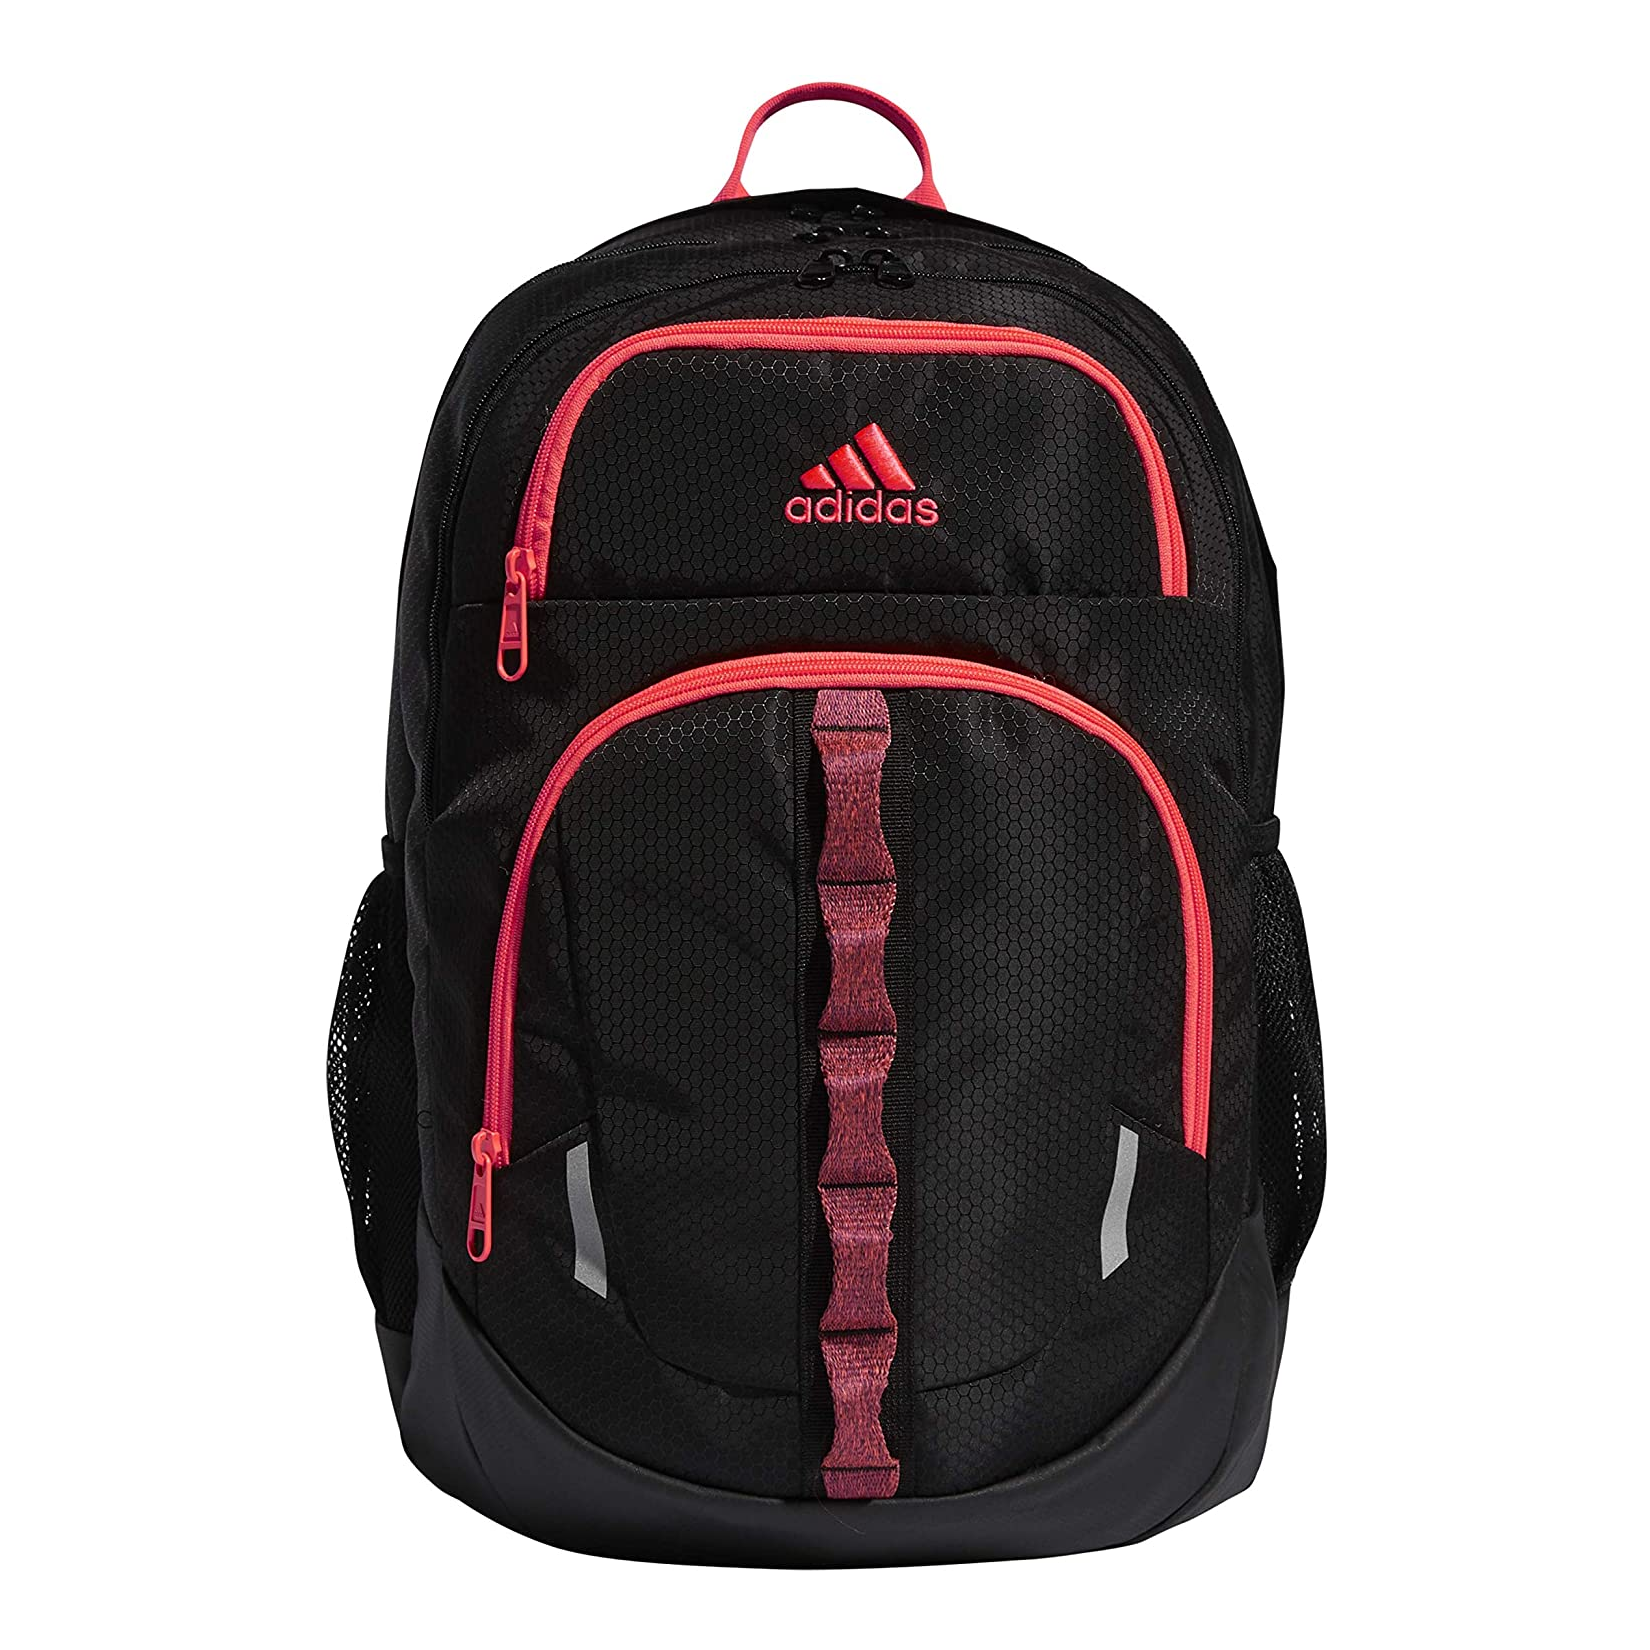 Adidas Prime Backpack Front View